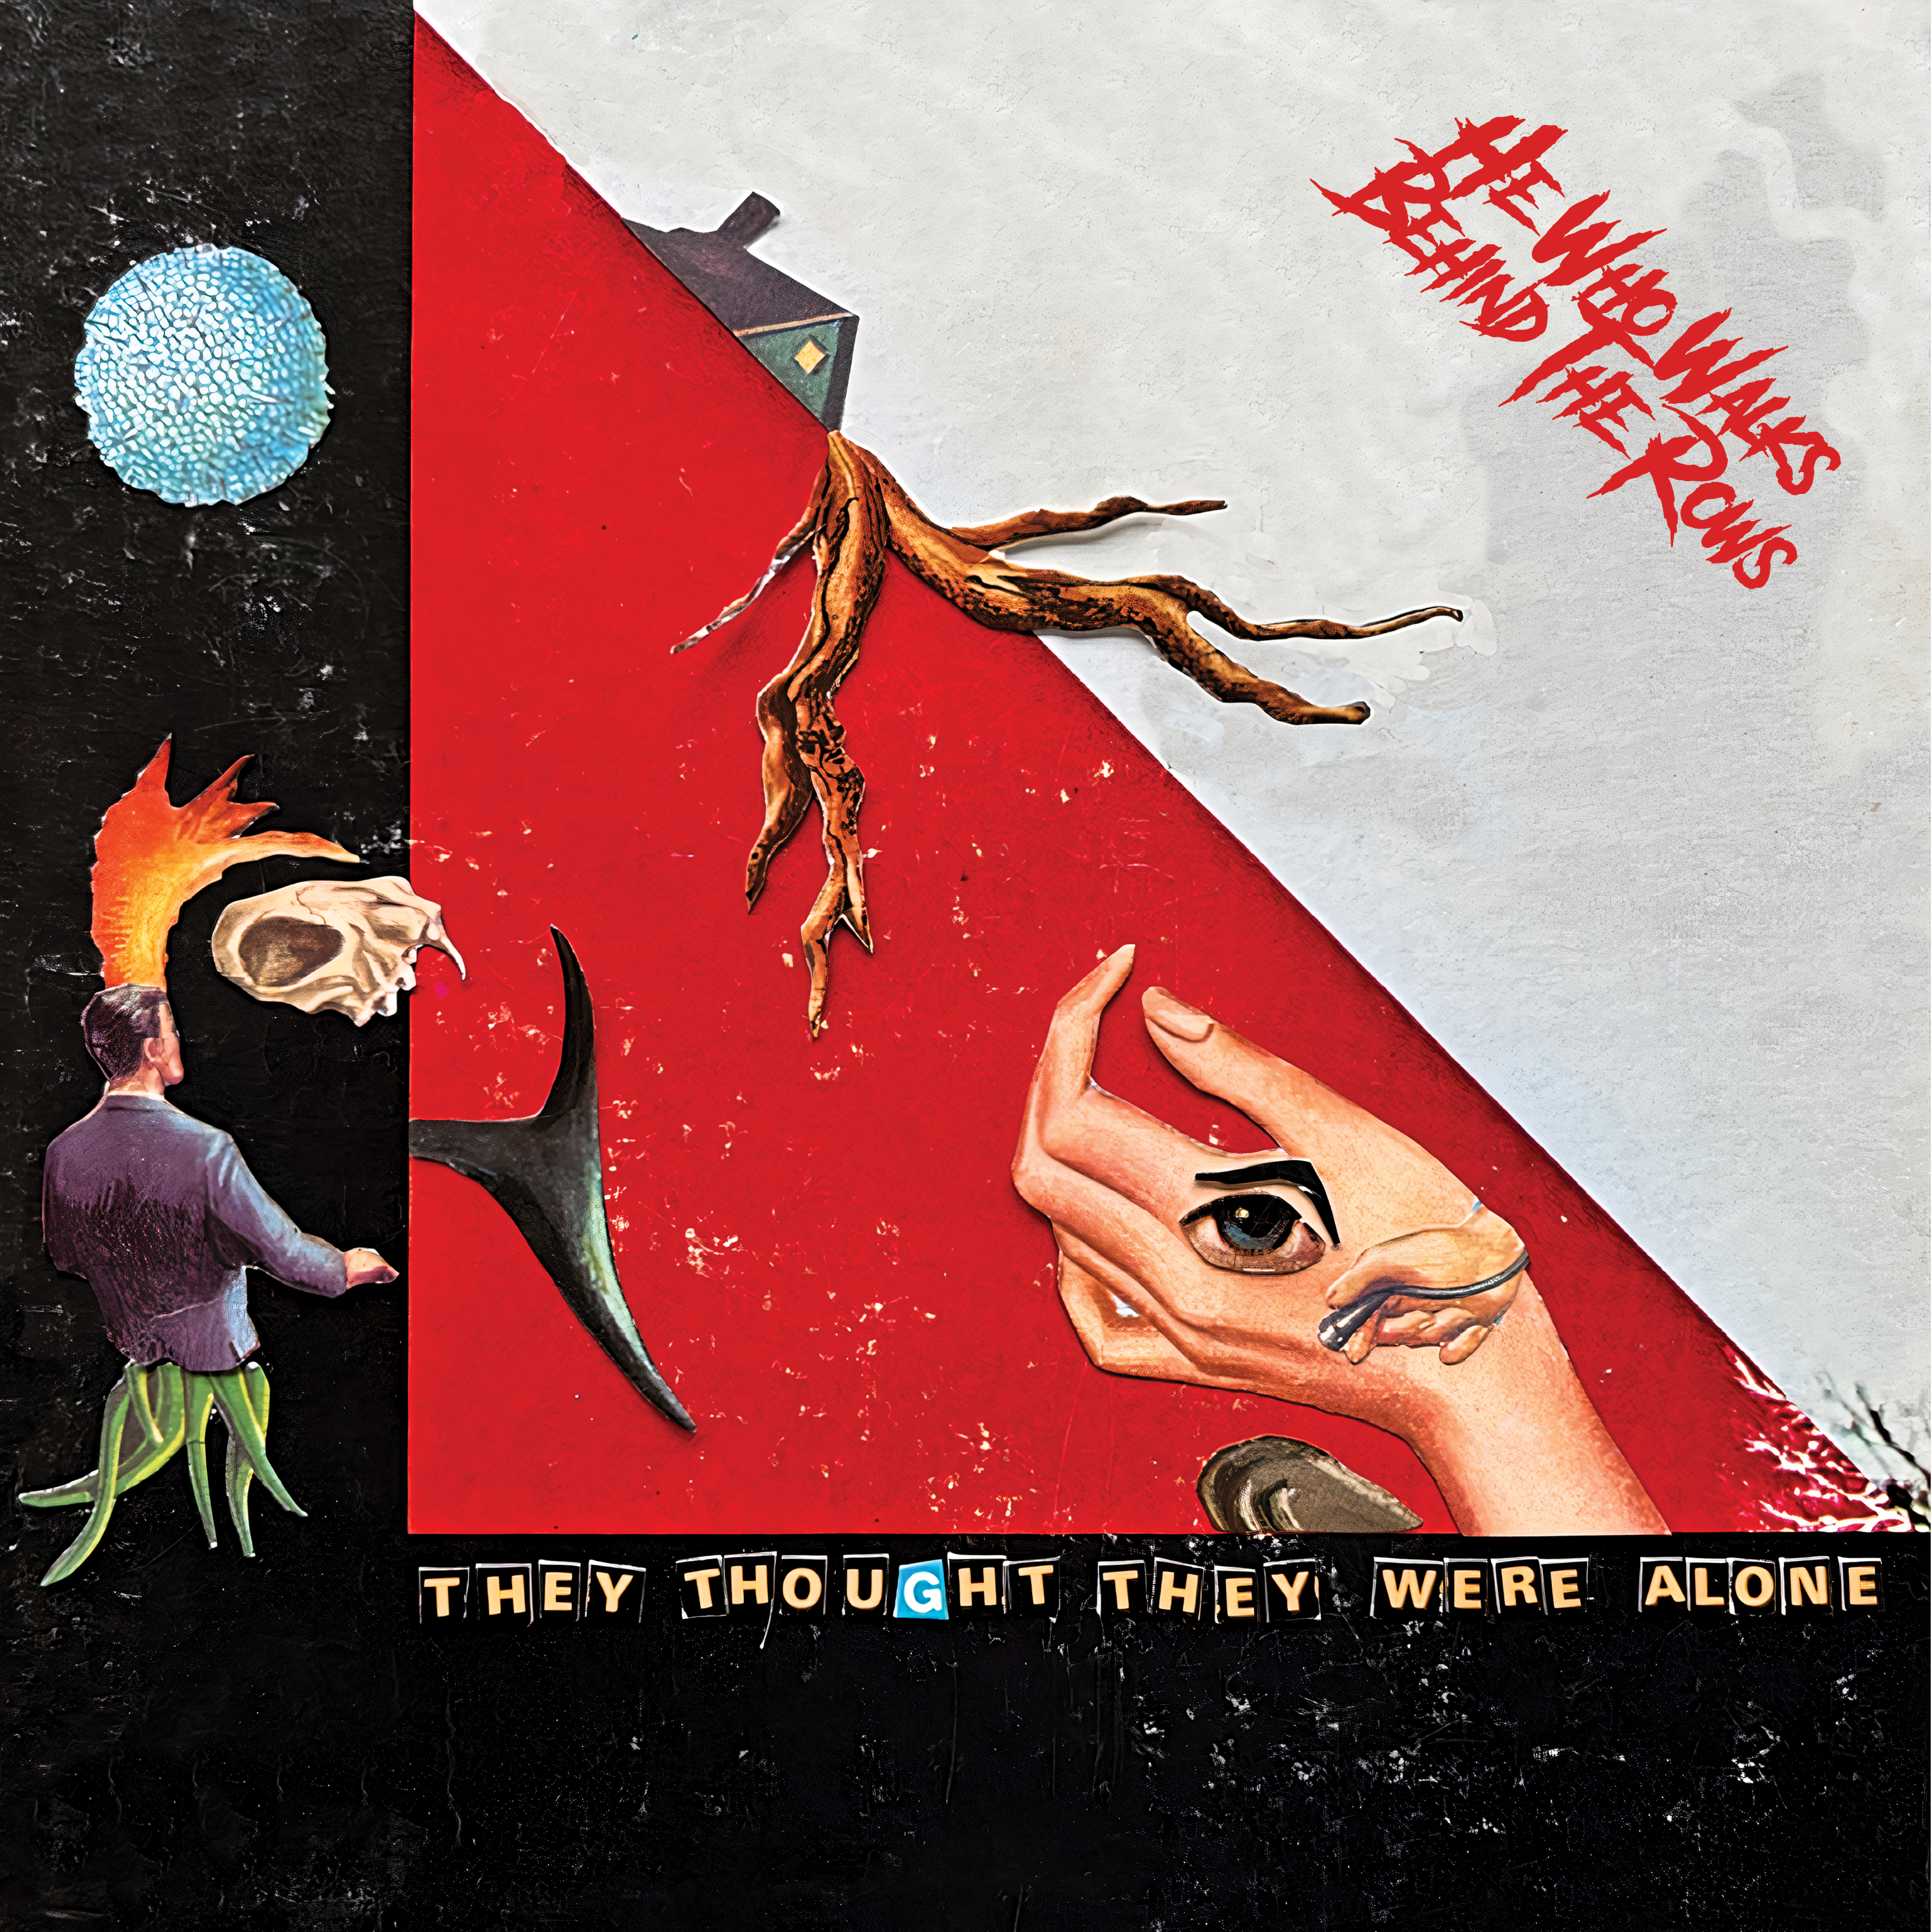 He Who Walks Behind The Rows - They Thought They Were Alone (Transp Red) - LP